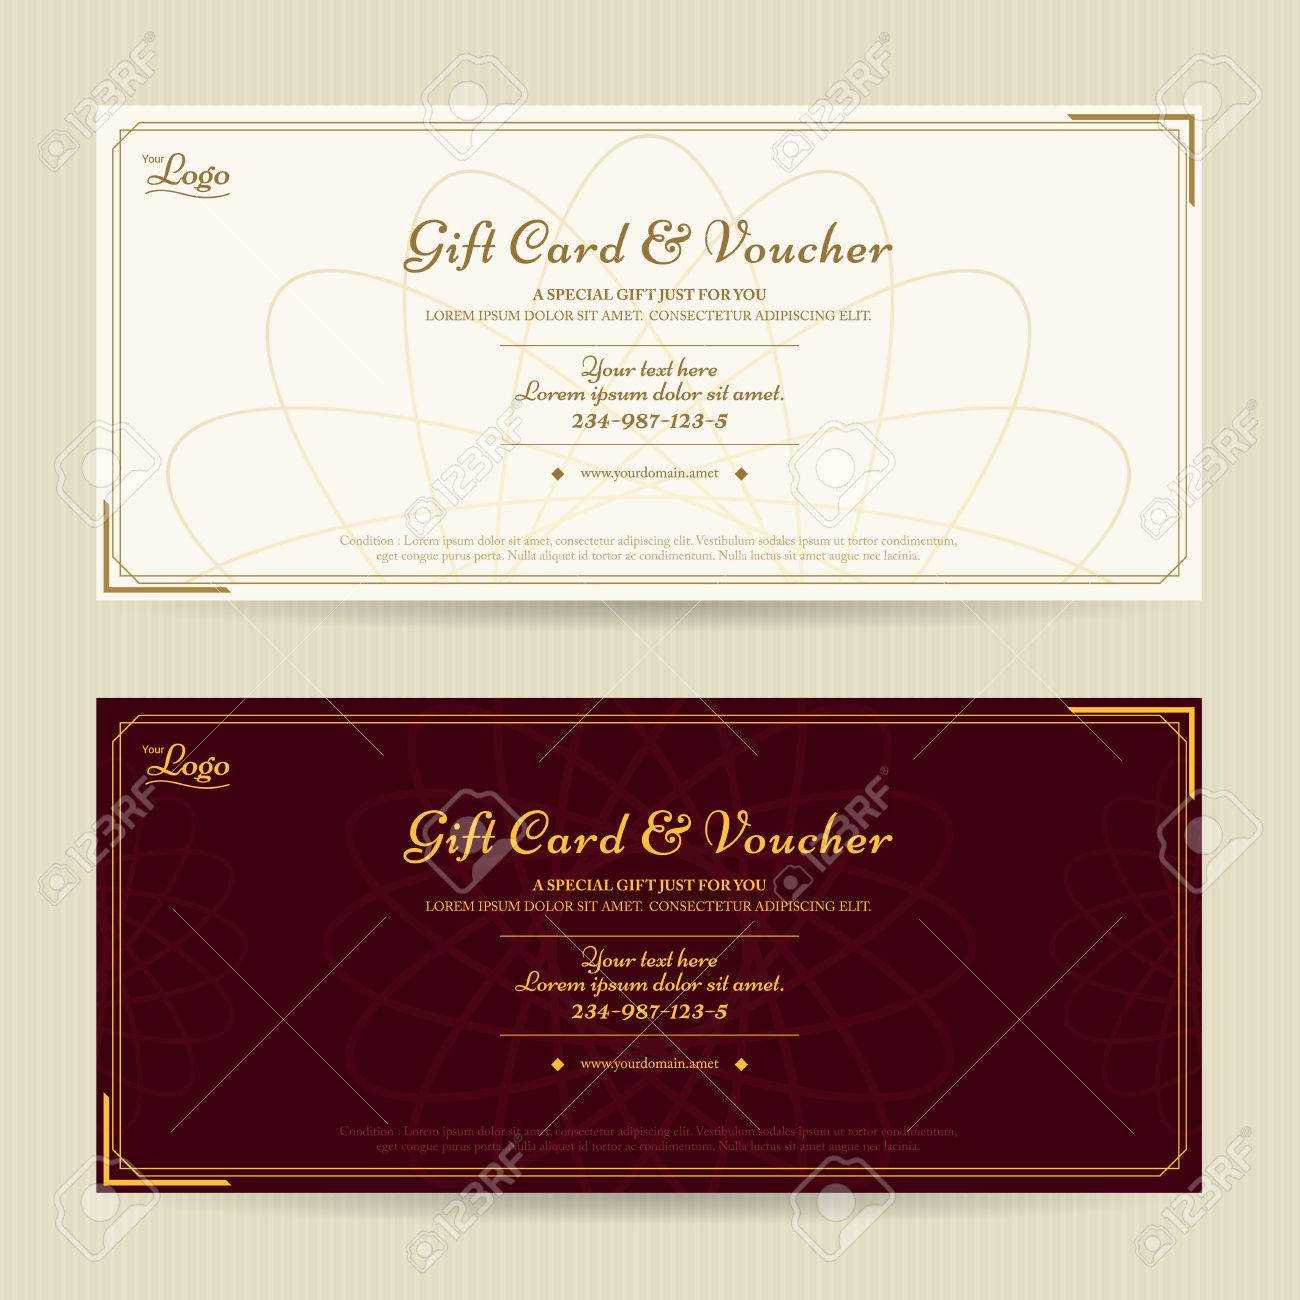 Elegant Gift Voucher Or Gift Card Template With Gold Border In Elegant Gift Certificate Template